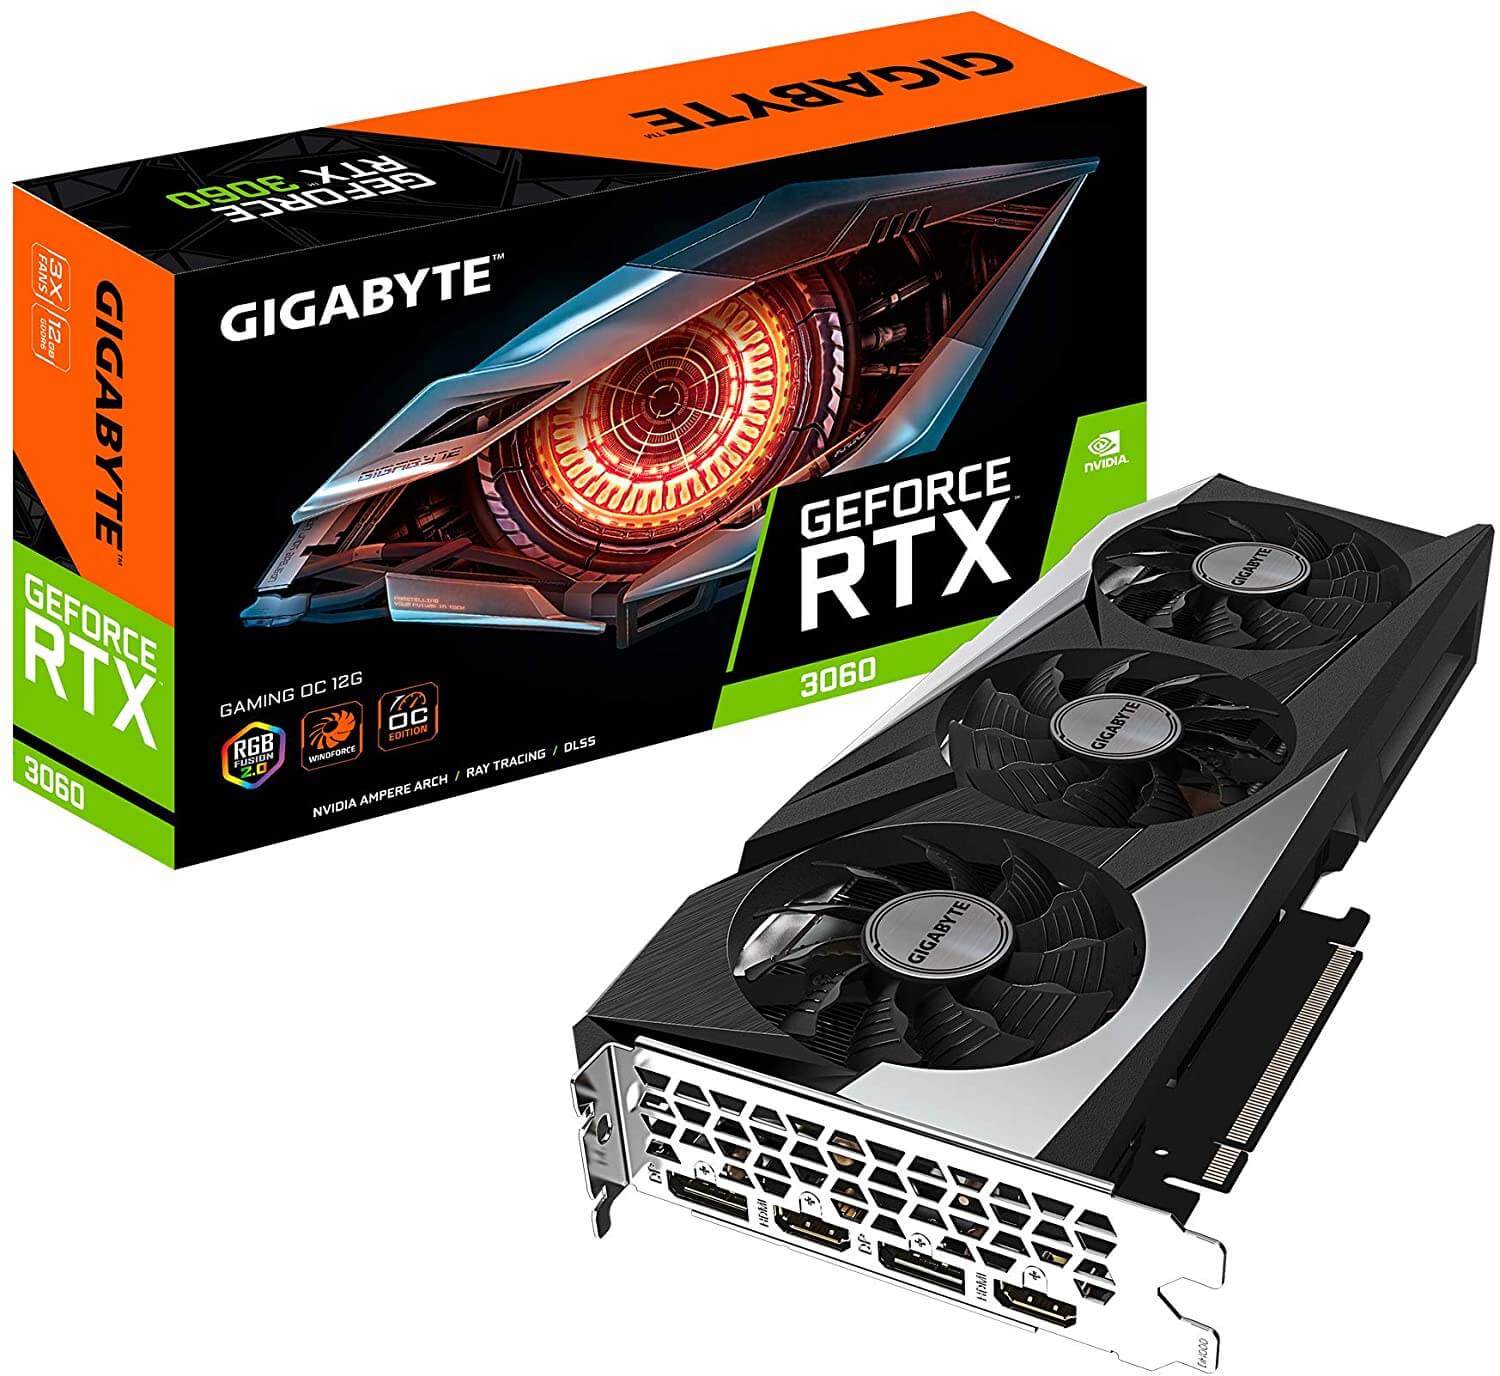 RTX 3060 is a good performance 1080p card